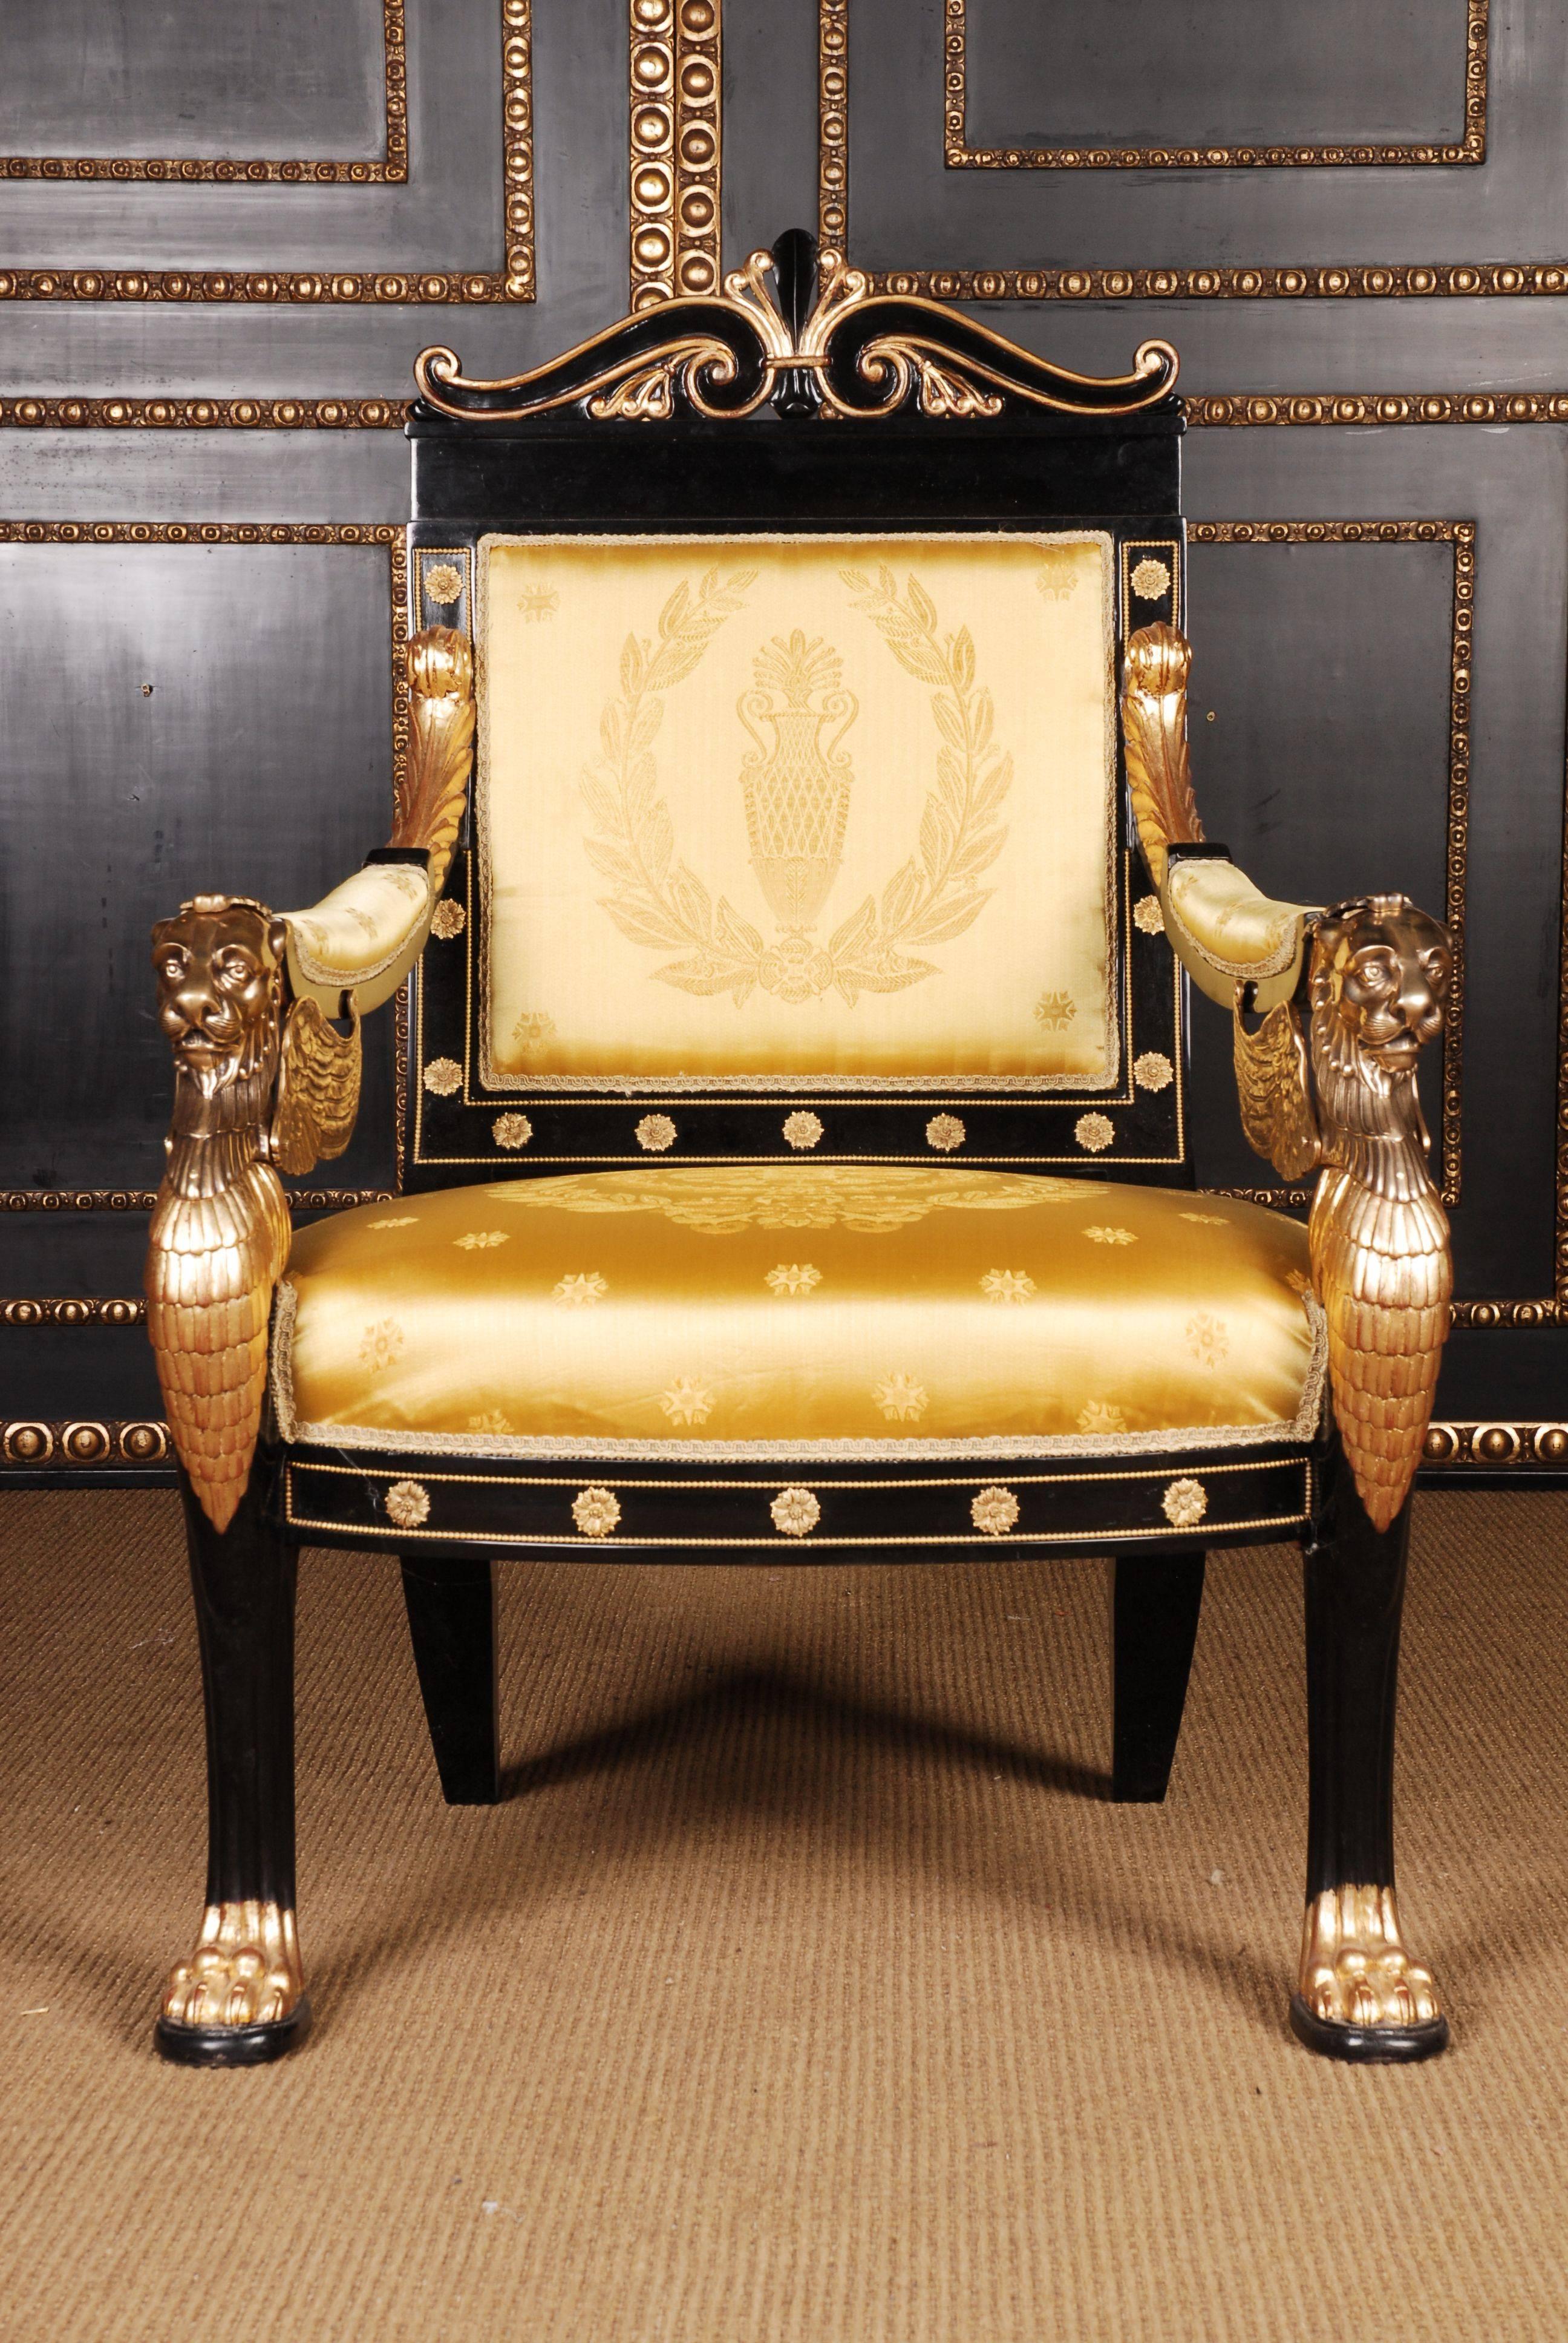 Imperial stylish lion armchair in Empire style.
Finely detailed carving work on solid ebonized beechwood. Gilded. Winged, protruding lions heads in bronze.

(B-Sam-61).